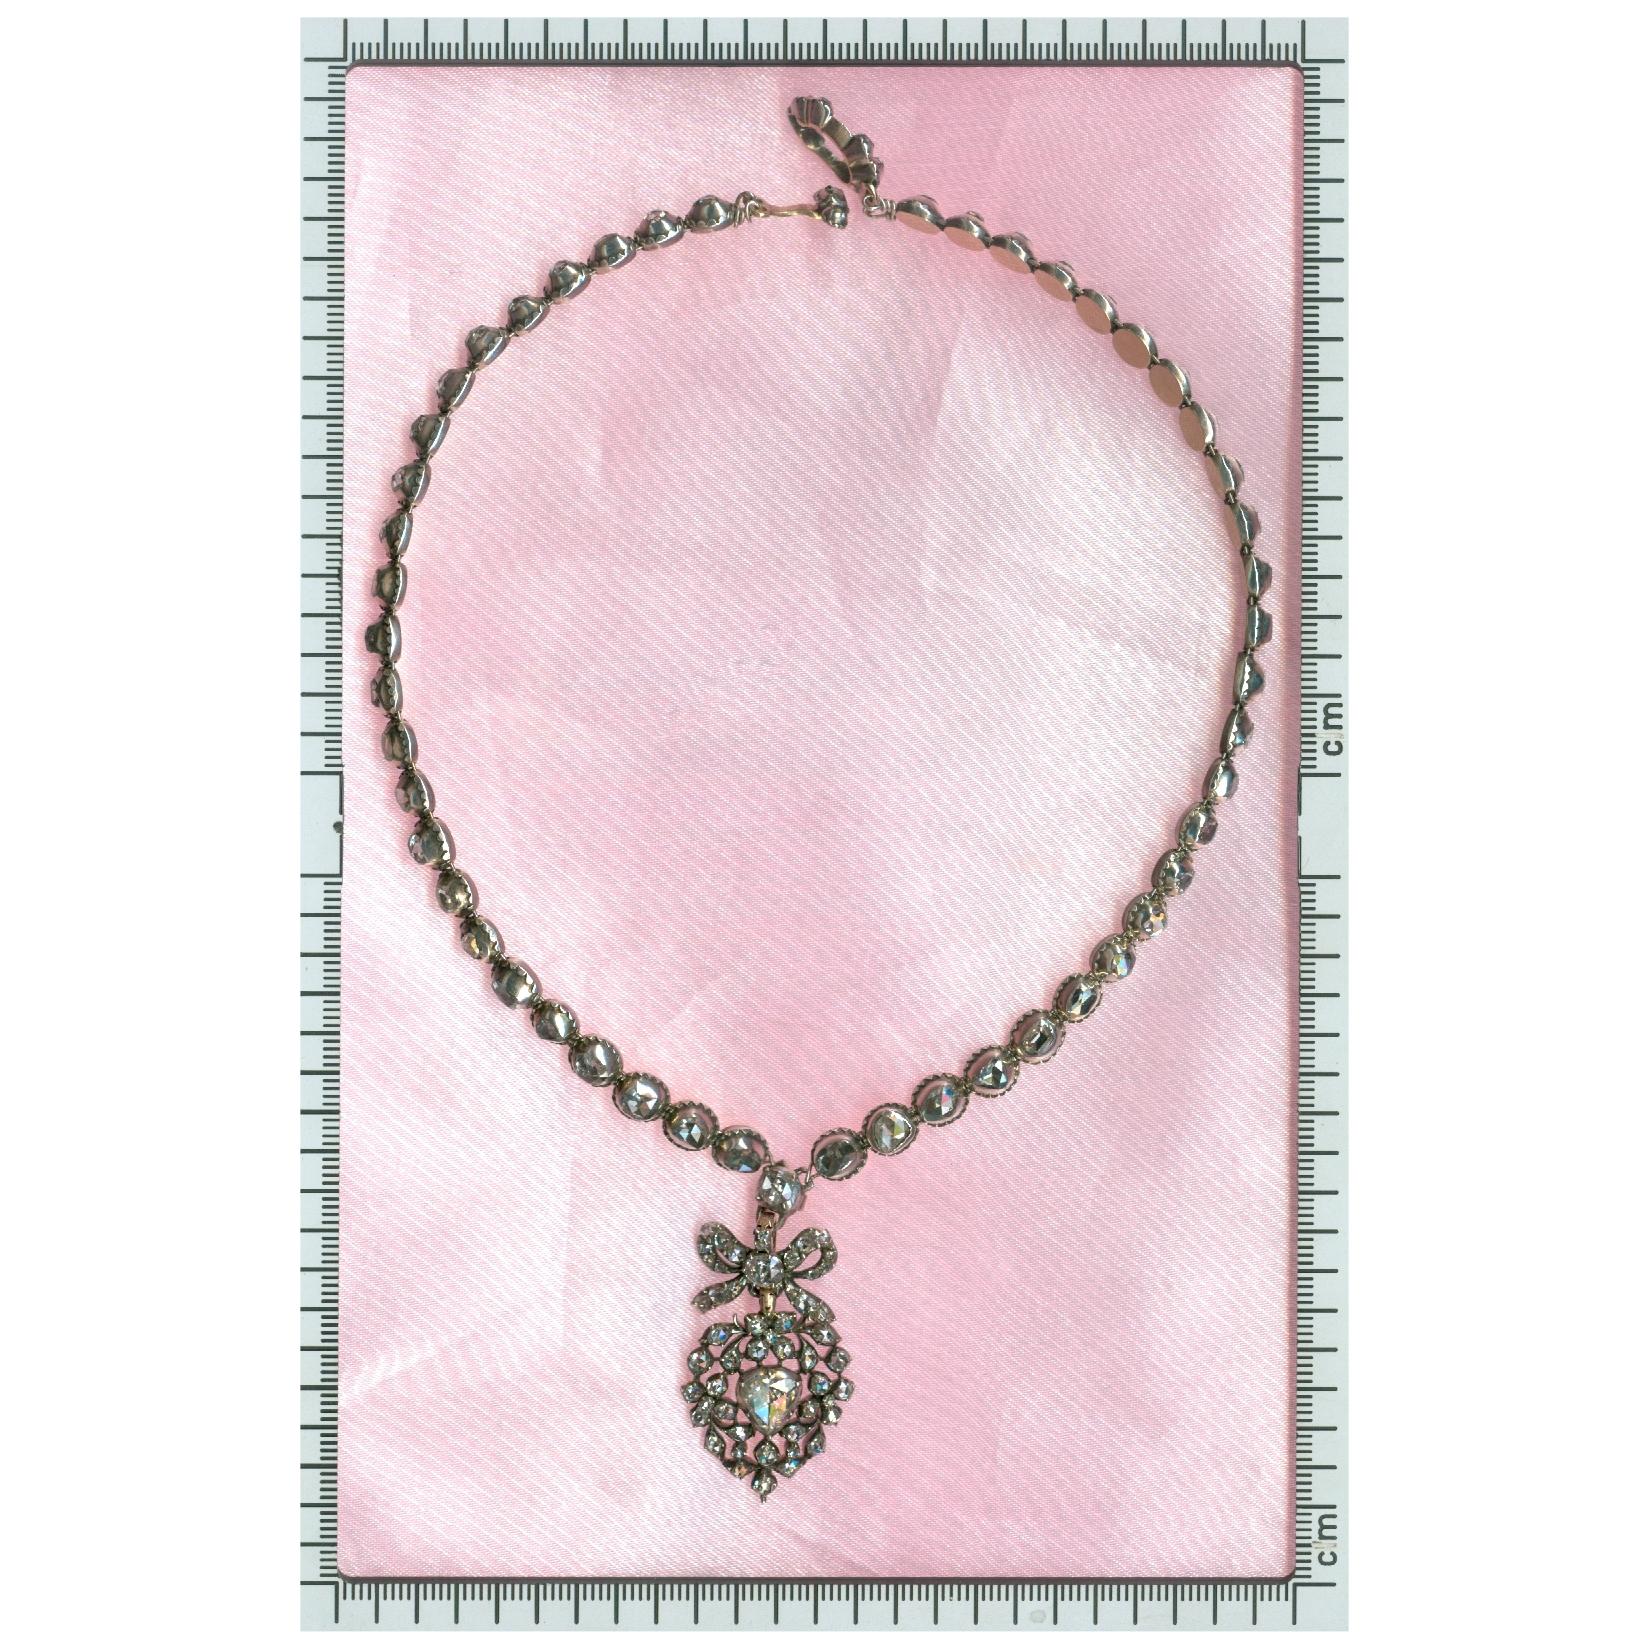 Rose Cut Diamond Riviere Necklace with a Diamond Set Crowned Heart Pendant 8